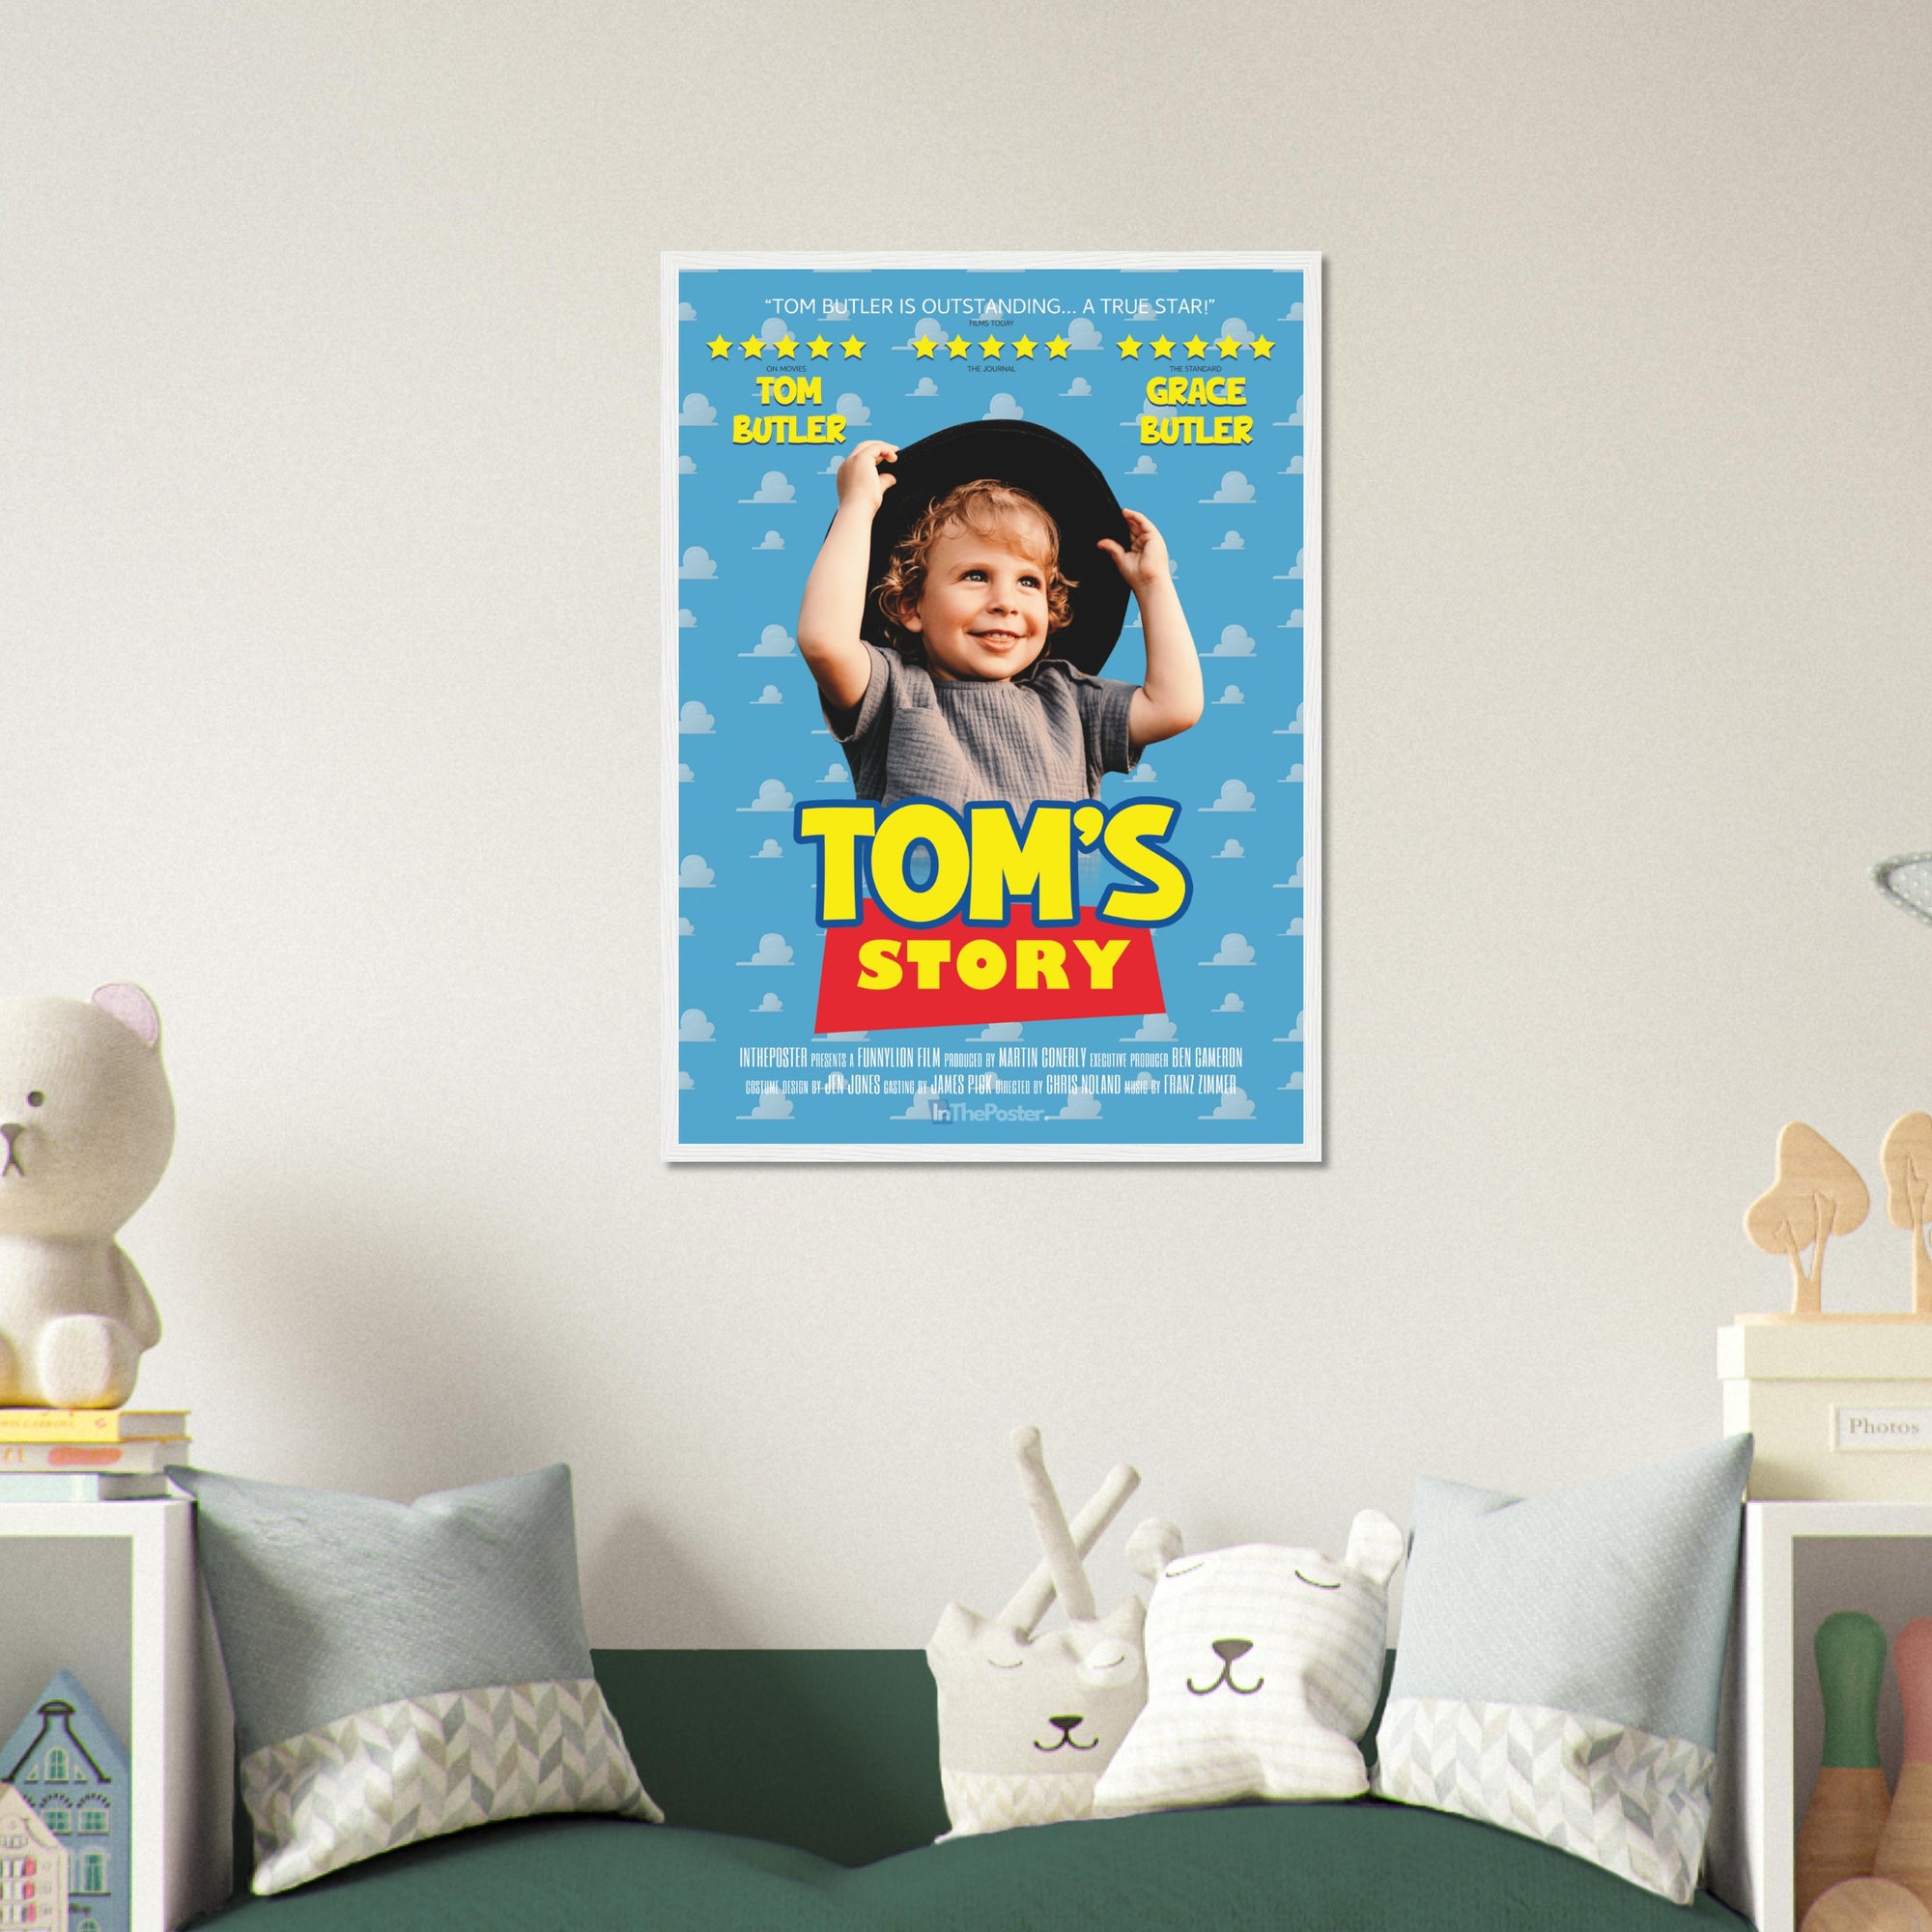 A Toy Story inspired movie poster design in a regular white frame, on a grey wall in a kids bedroom